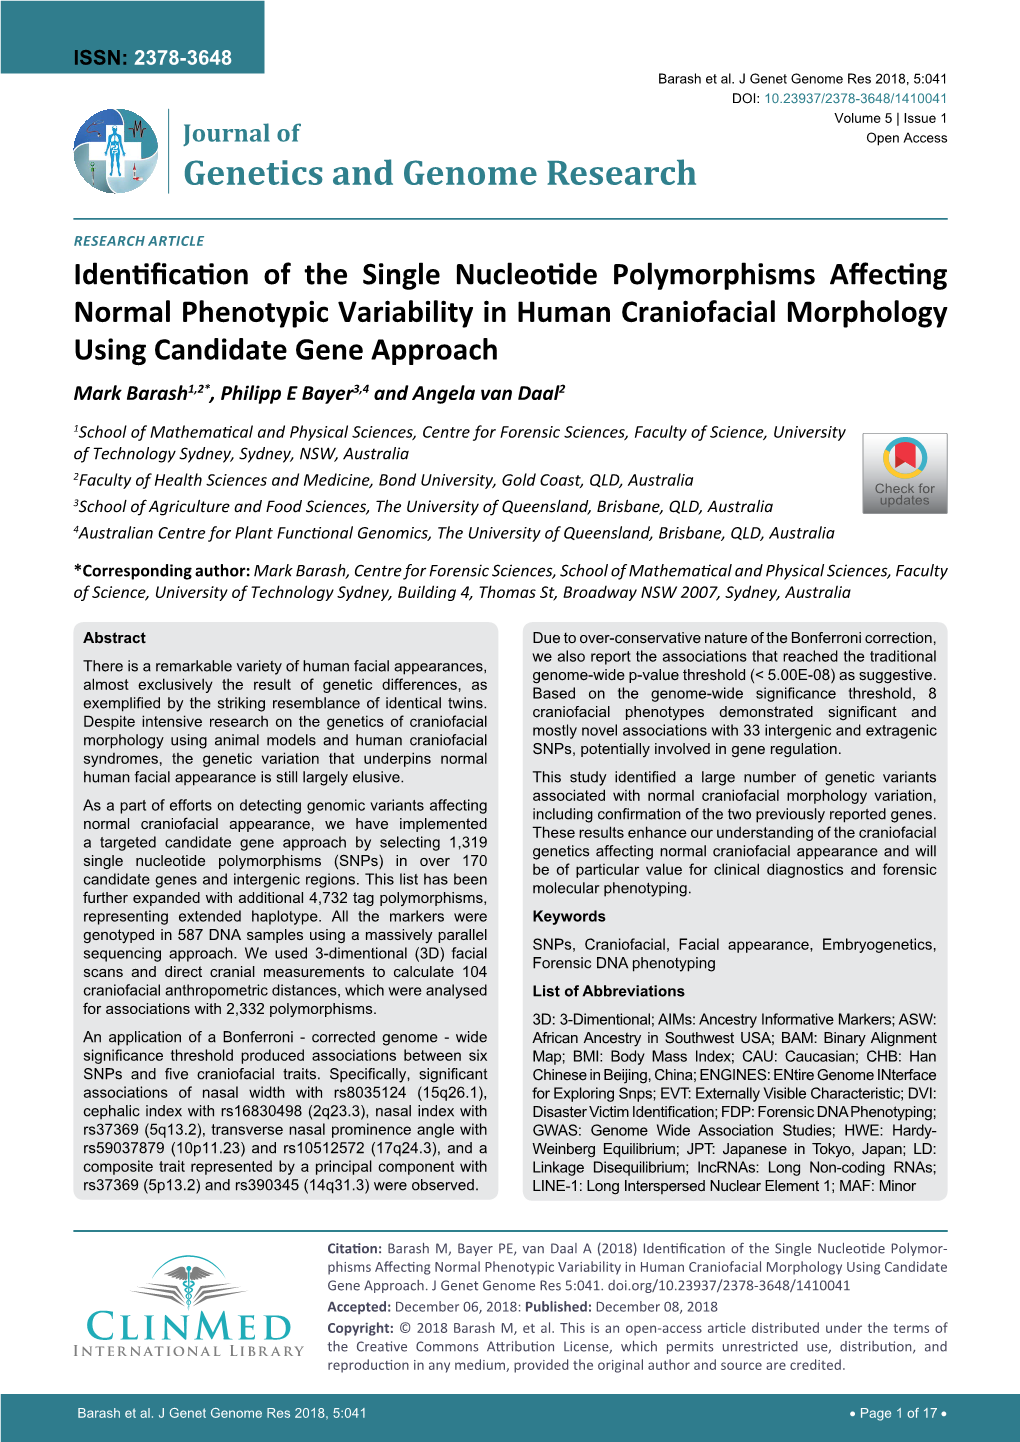 Identification of the Single Nucleotide Polymor-Phisms Affecting Normal